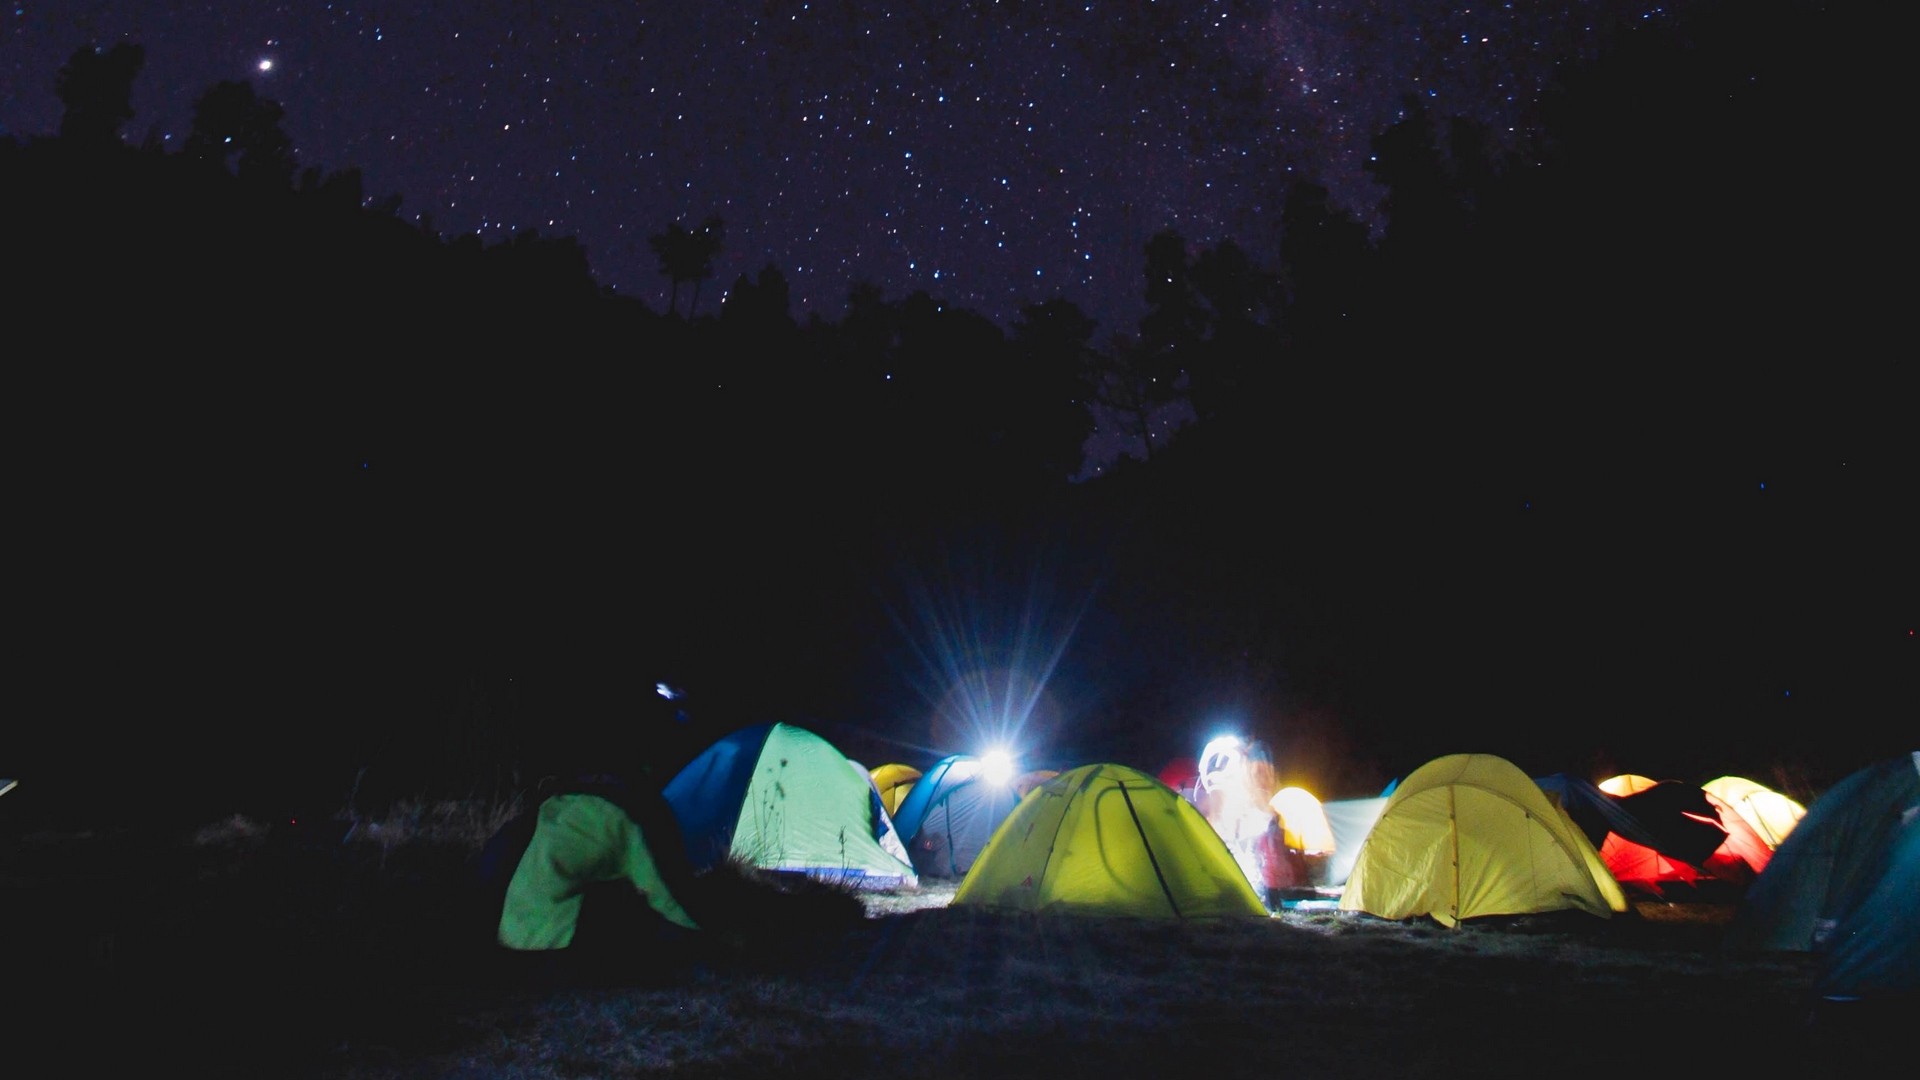 1920x1080 wallpapers: tent, camping, starry sky, tents (image)